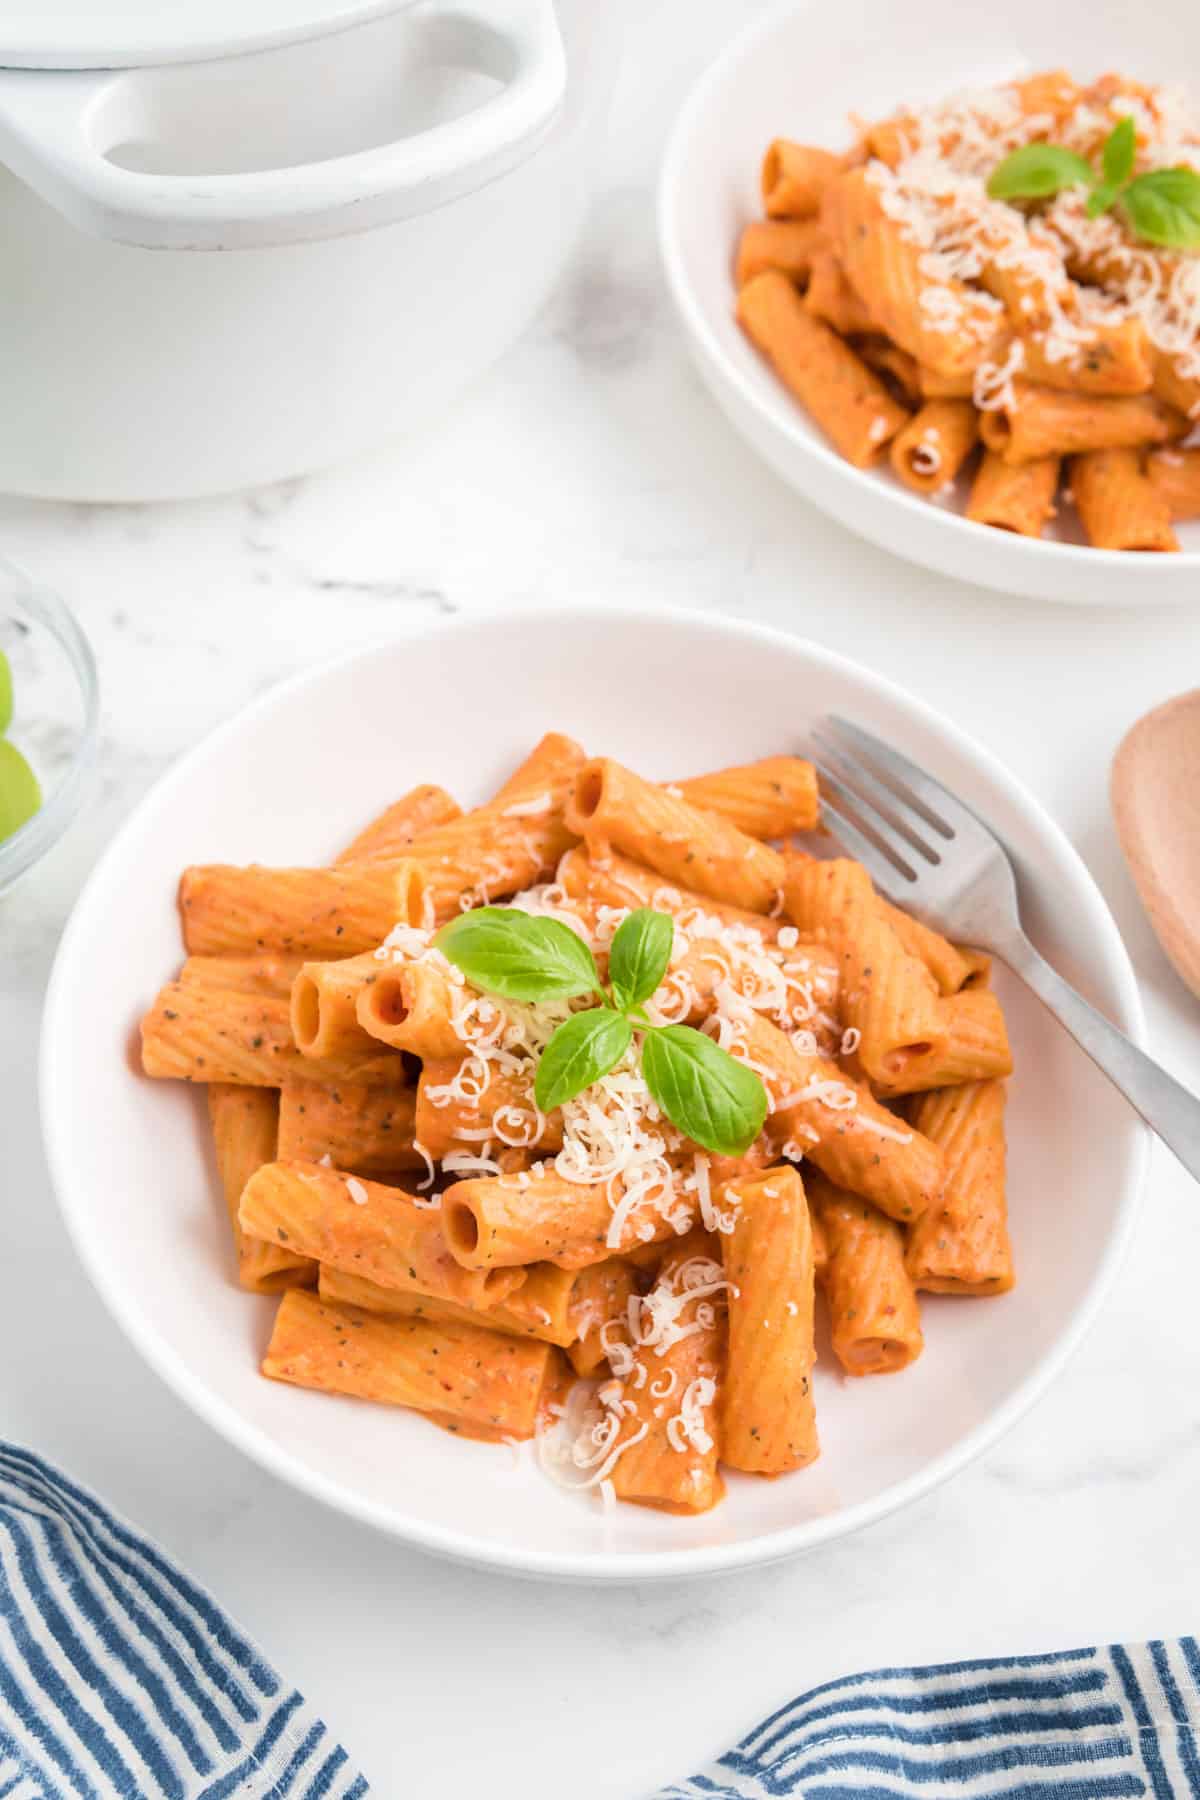 Pink sauce pasta made with Boursin cheese served in a white bowl with parmesan and fresh basil leaves.